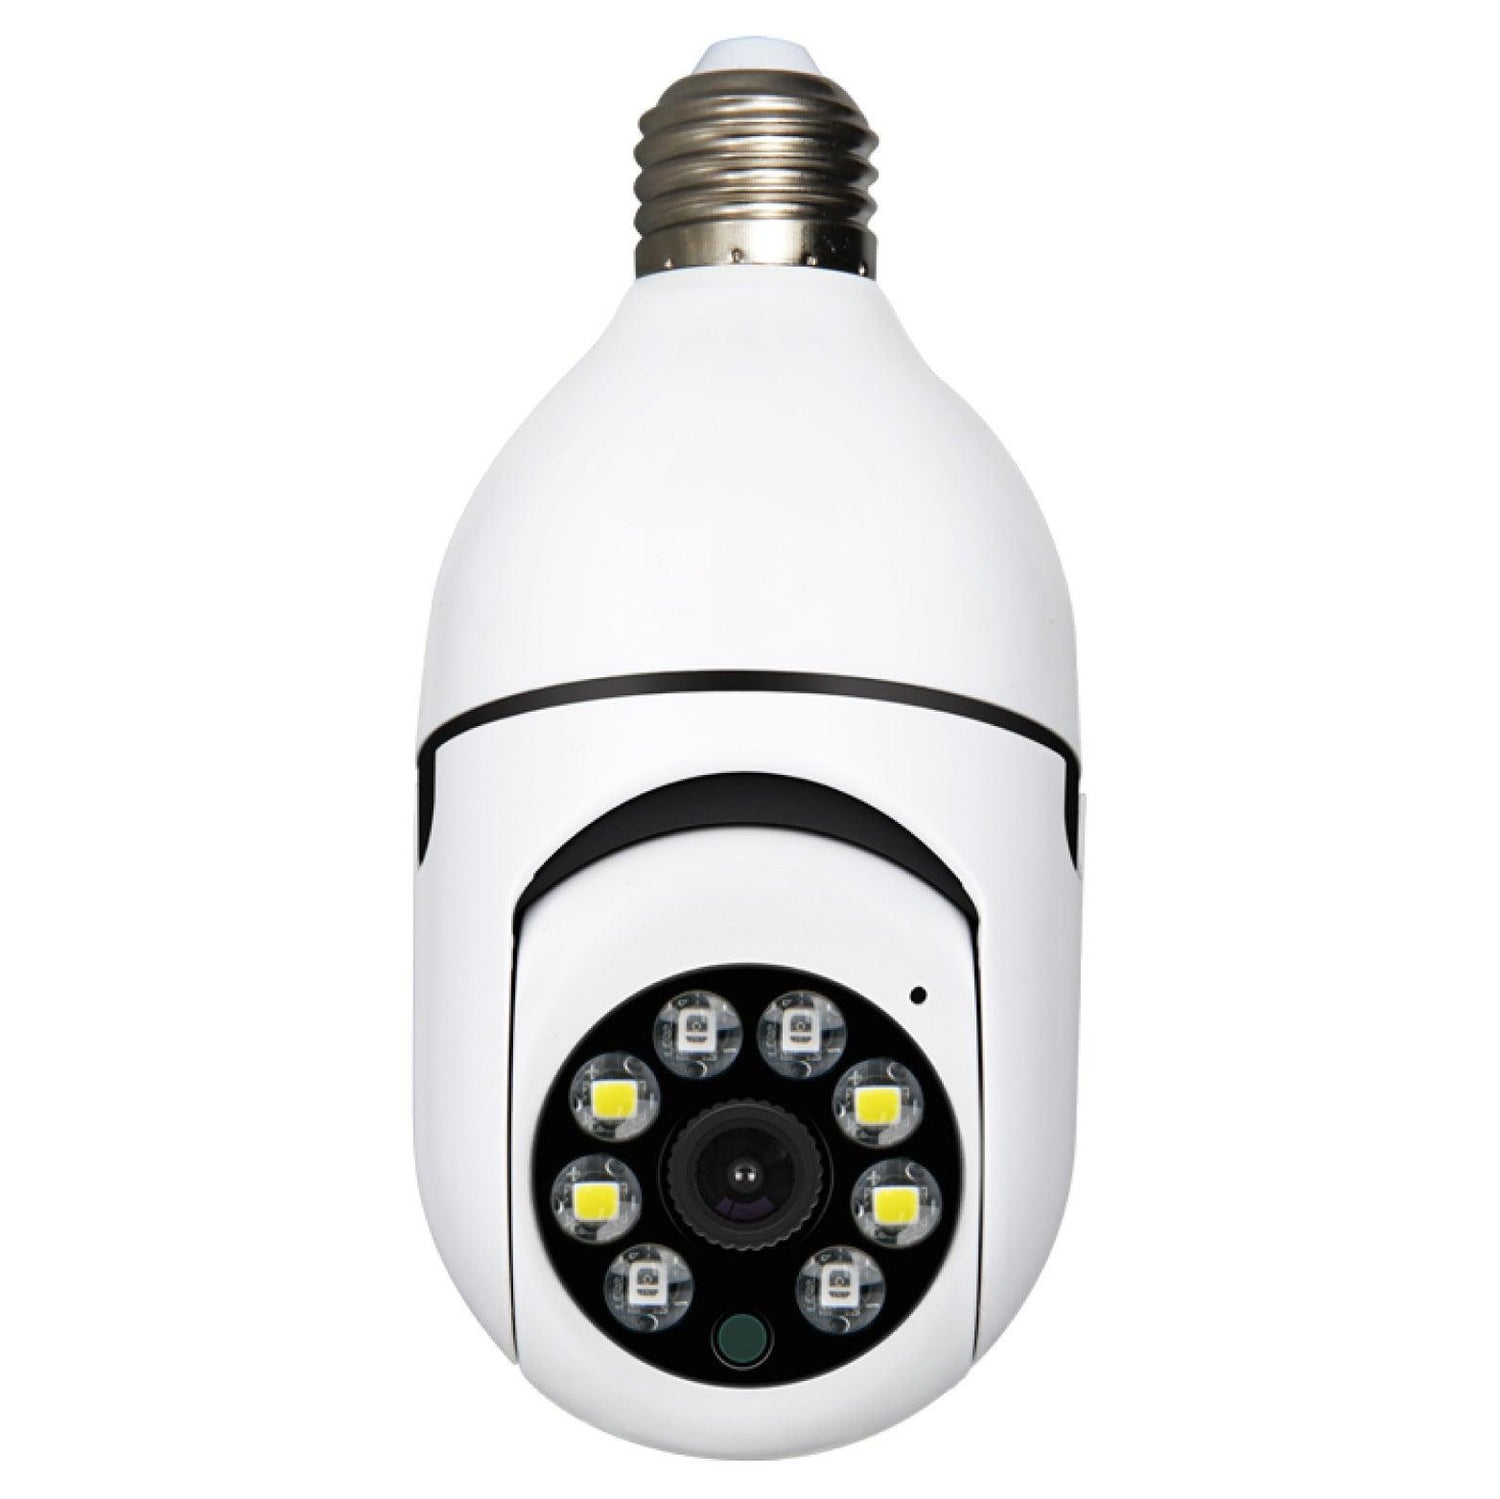 Wireless WiFi Full Color Bulb Camera Cell Phone Monitoring Affordable Deals Limited